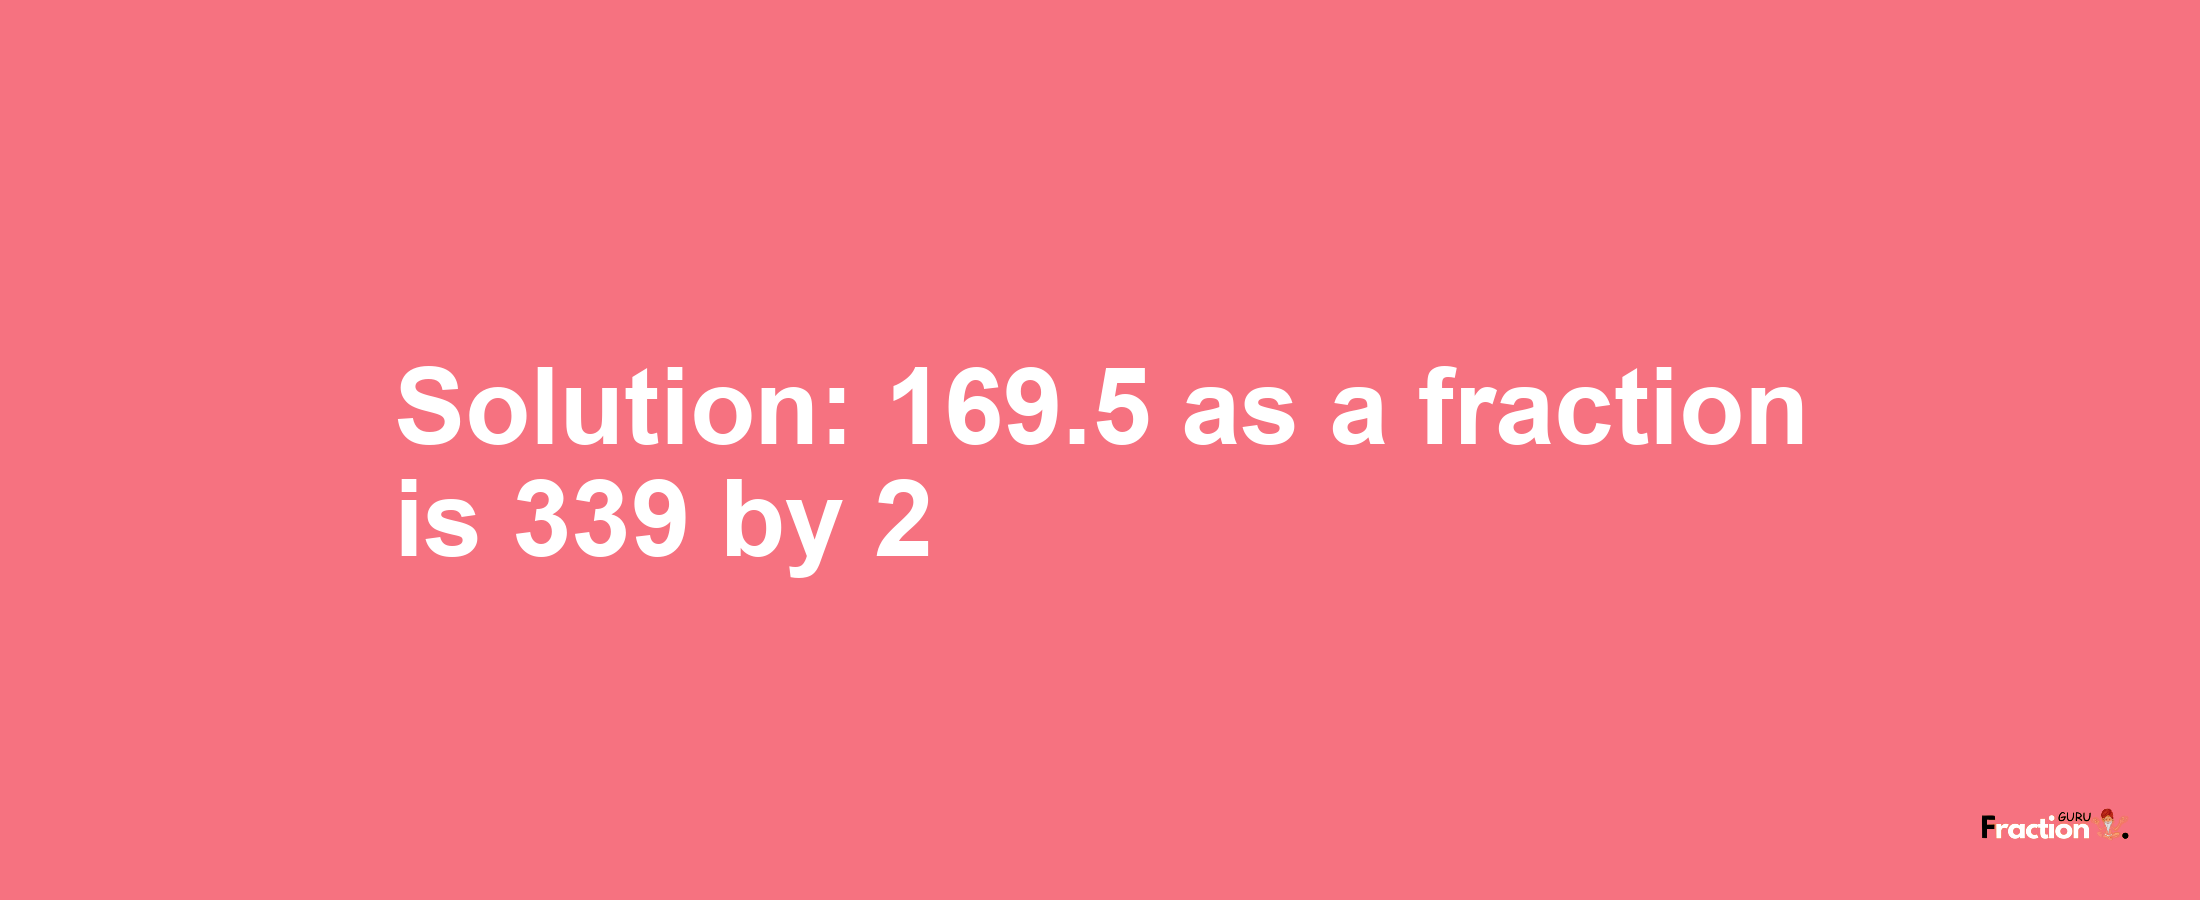 Solution:169.5 as a fraction is 339/2